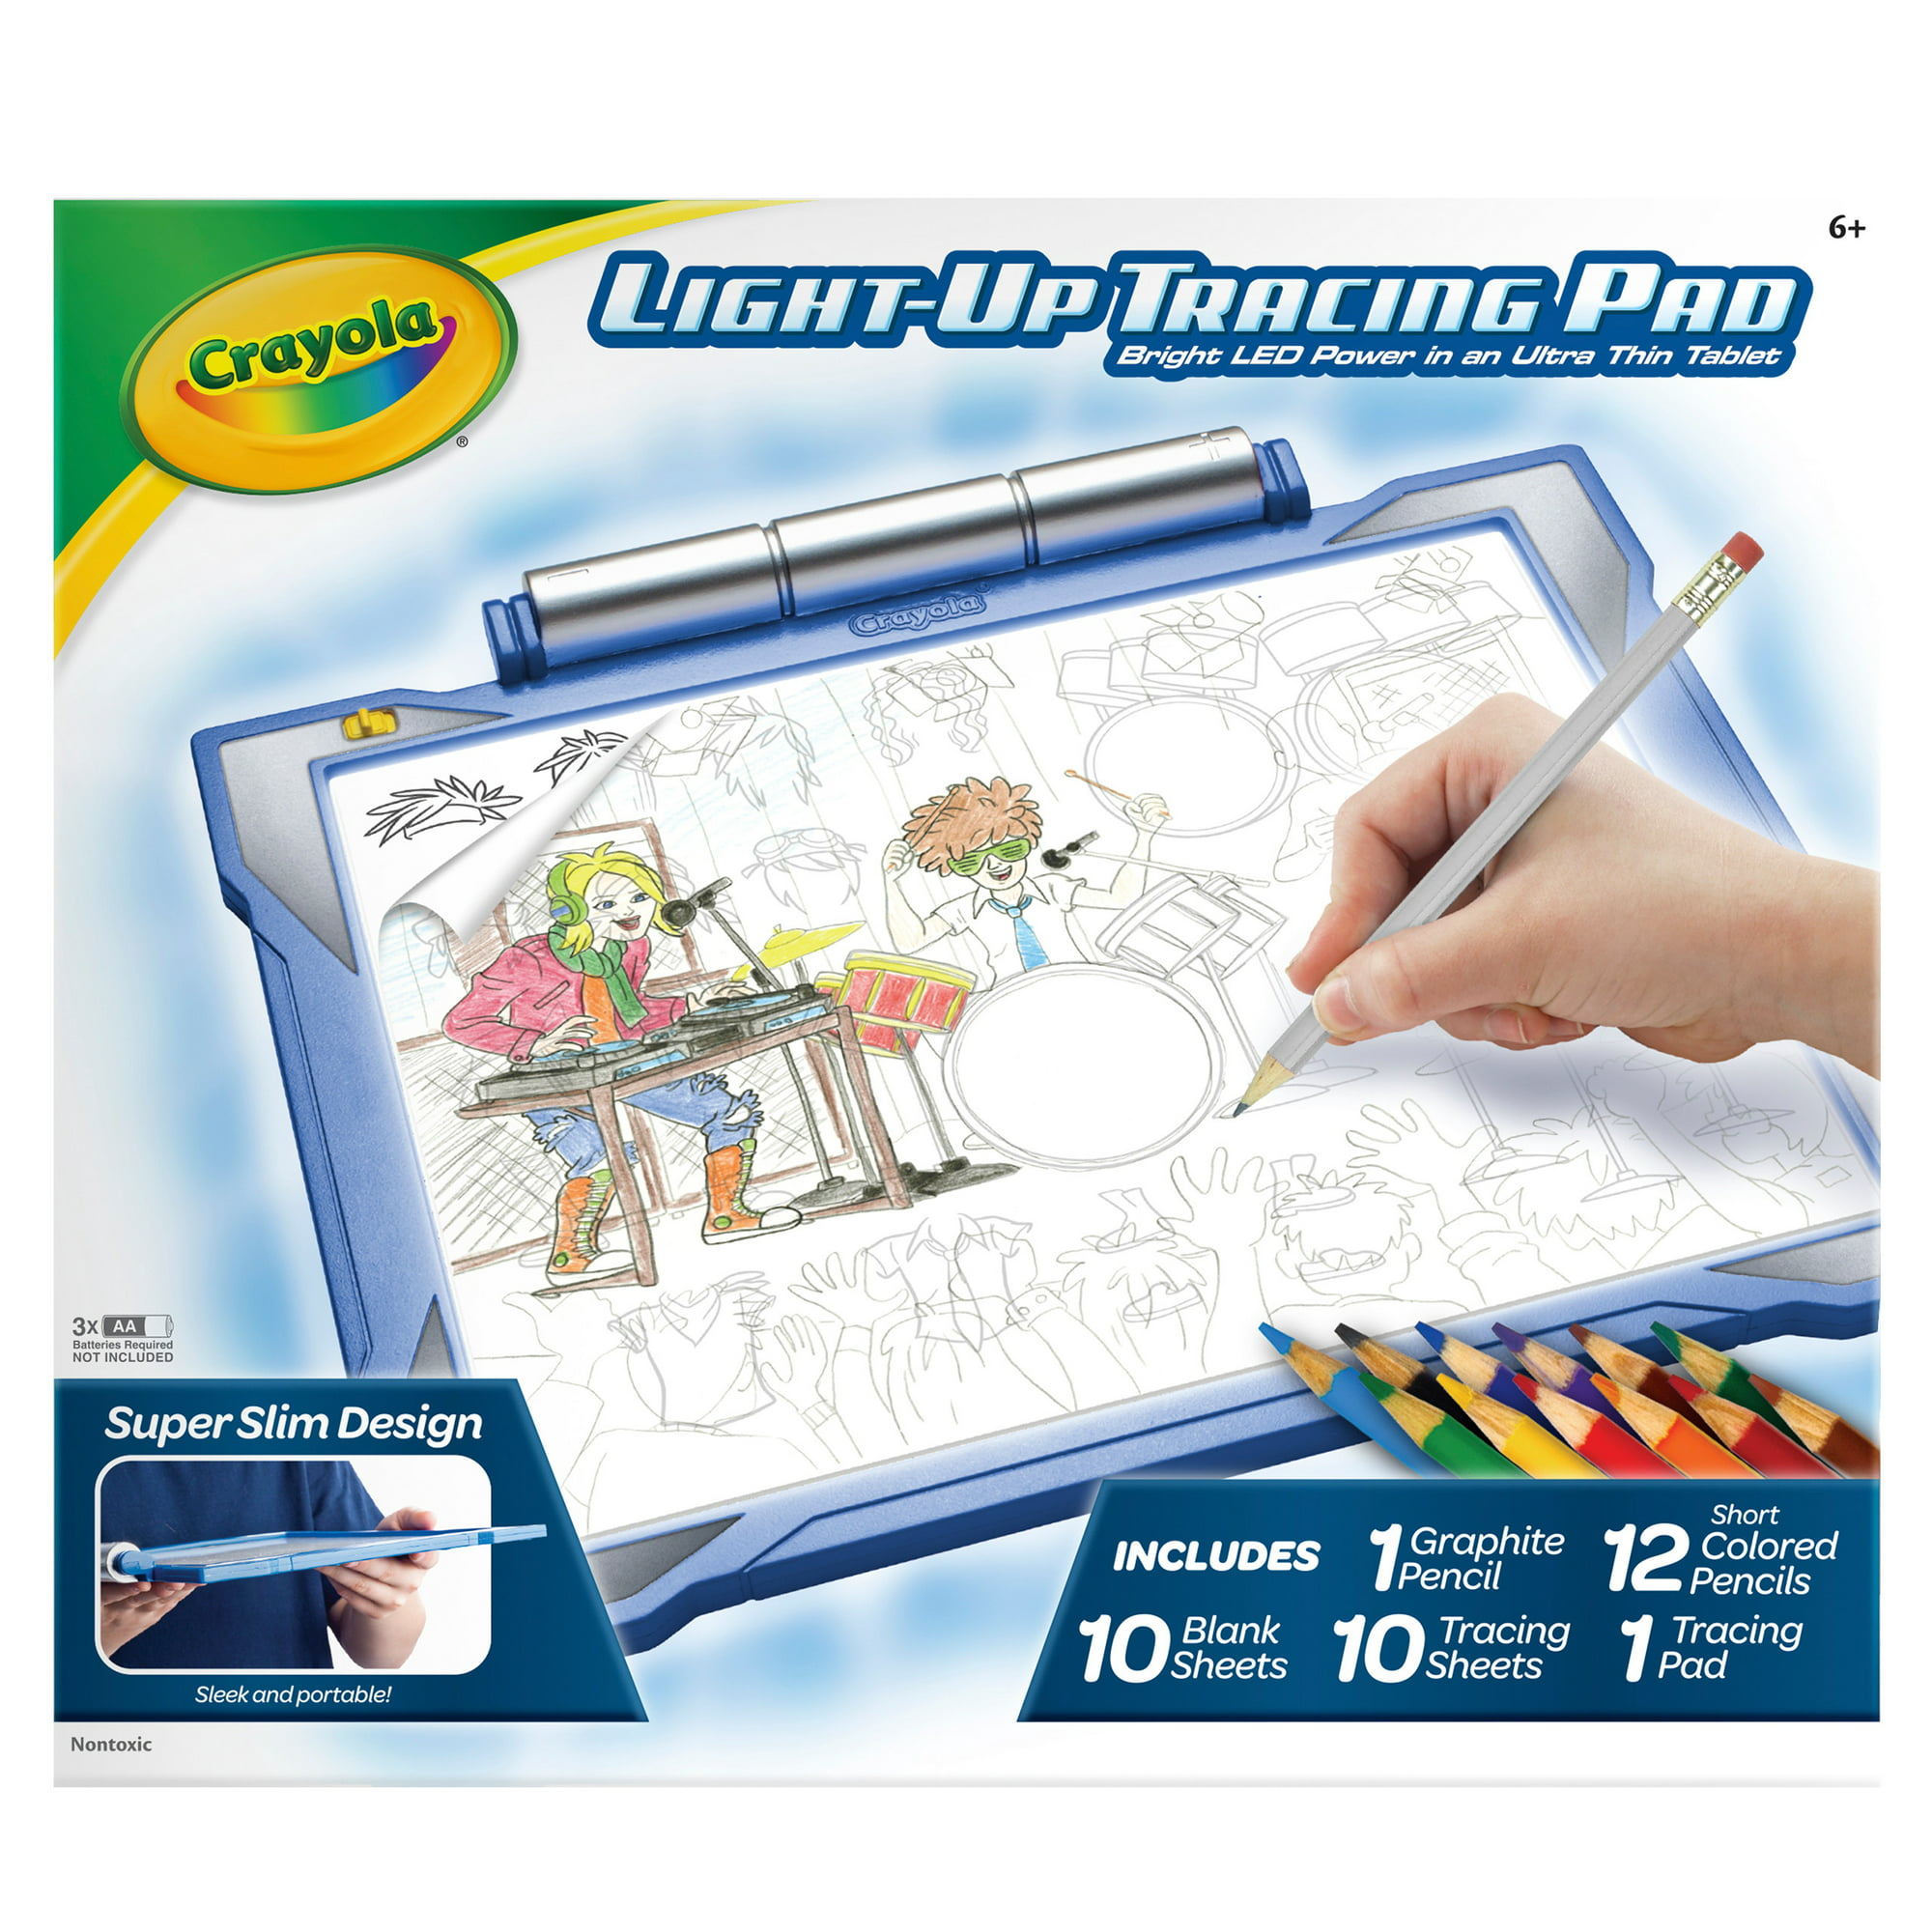 Crayola Light Up Tracing Pad - Teal (040830) for sale online